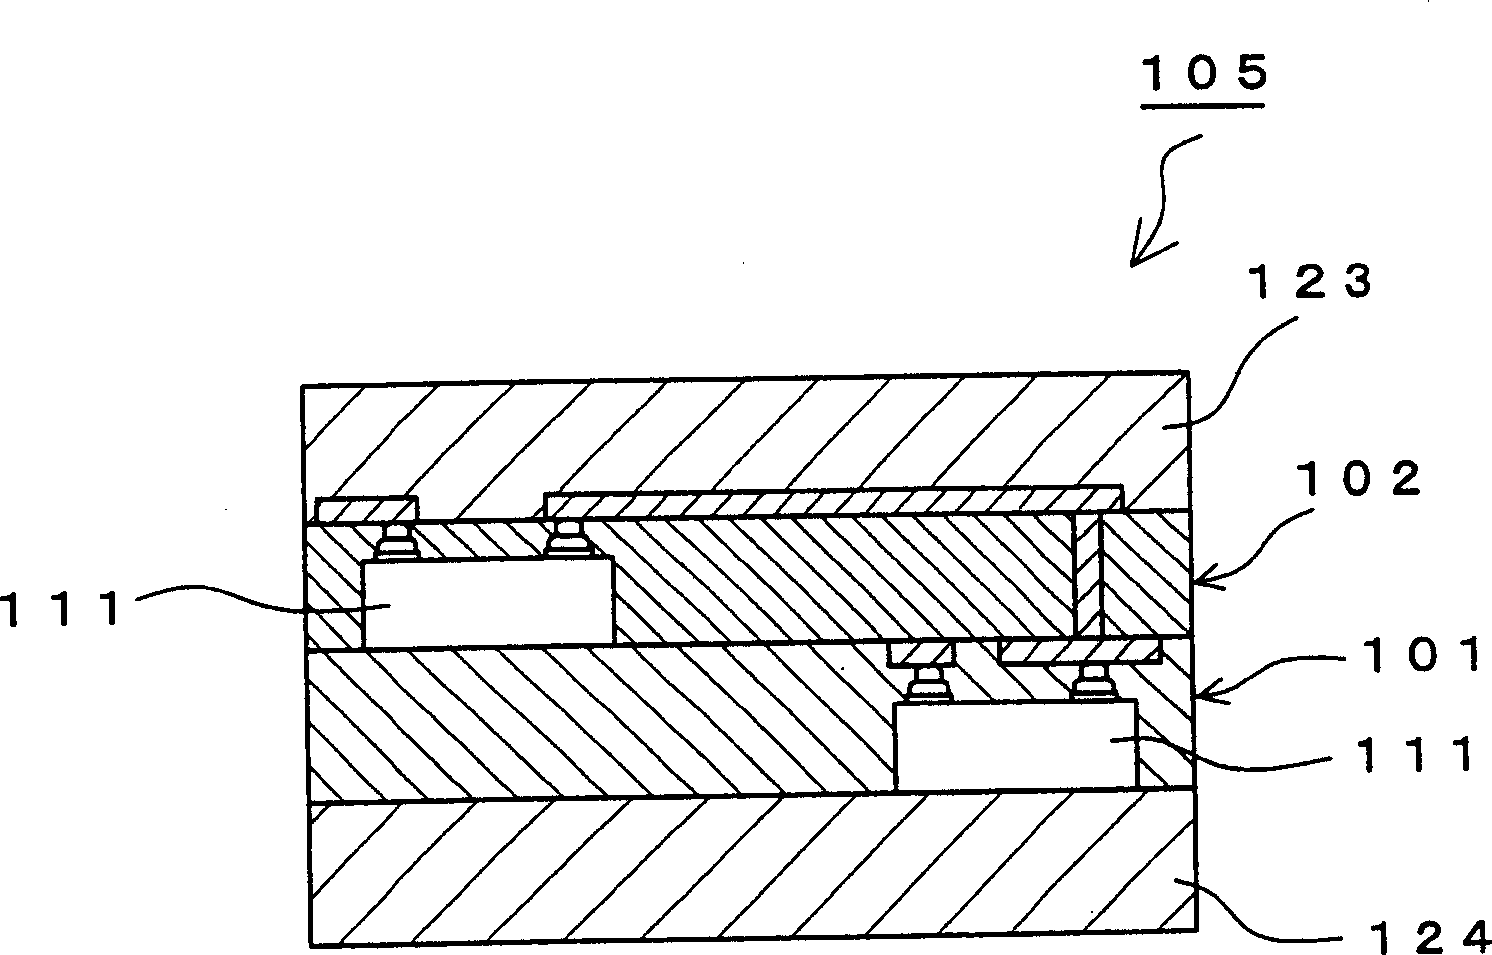 Mfg. method of assembly set with electronic component and mfg. method for related products